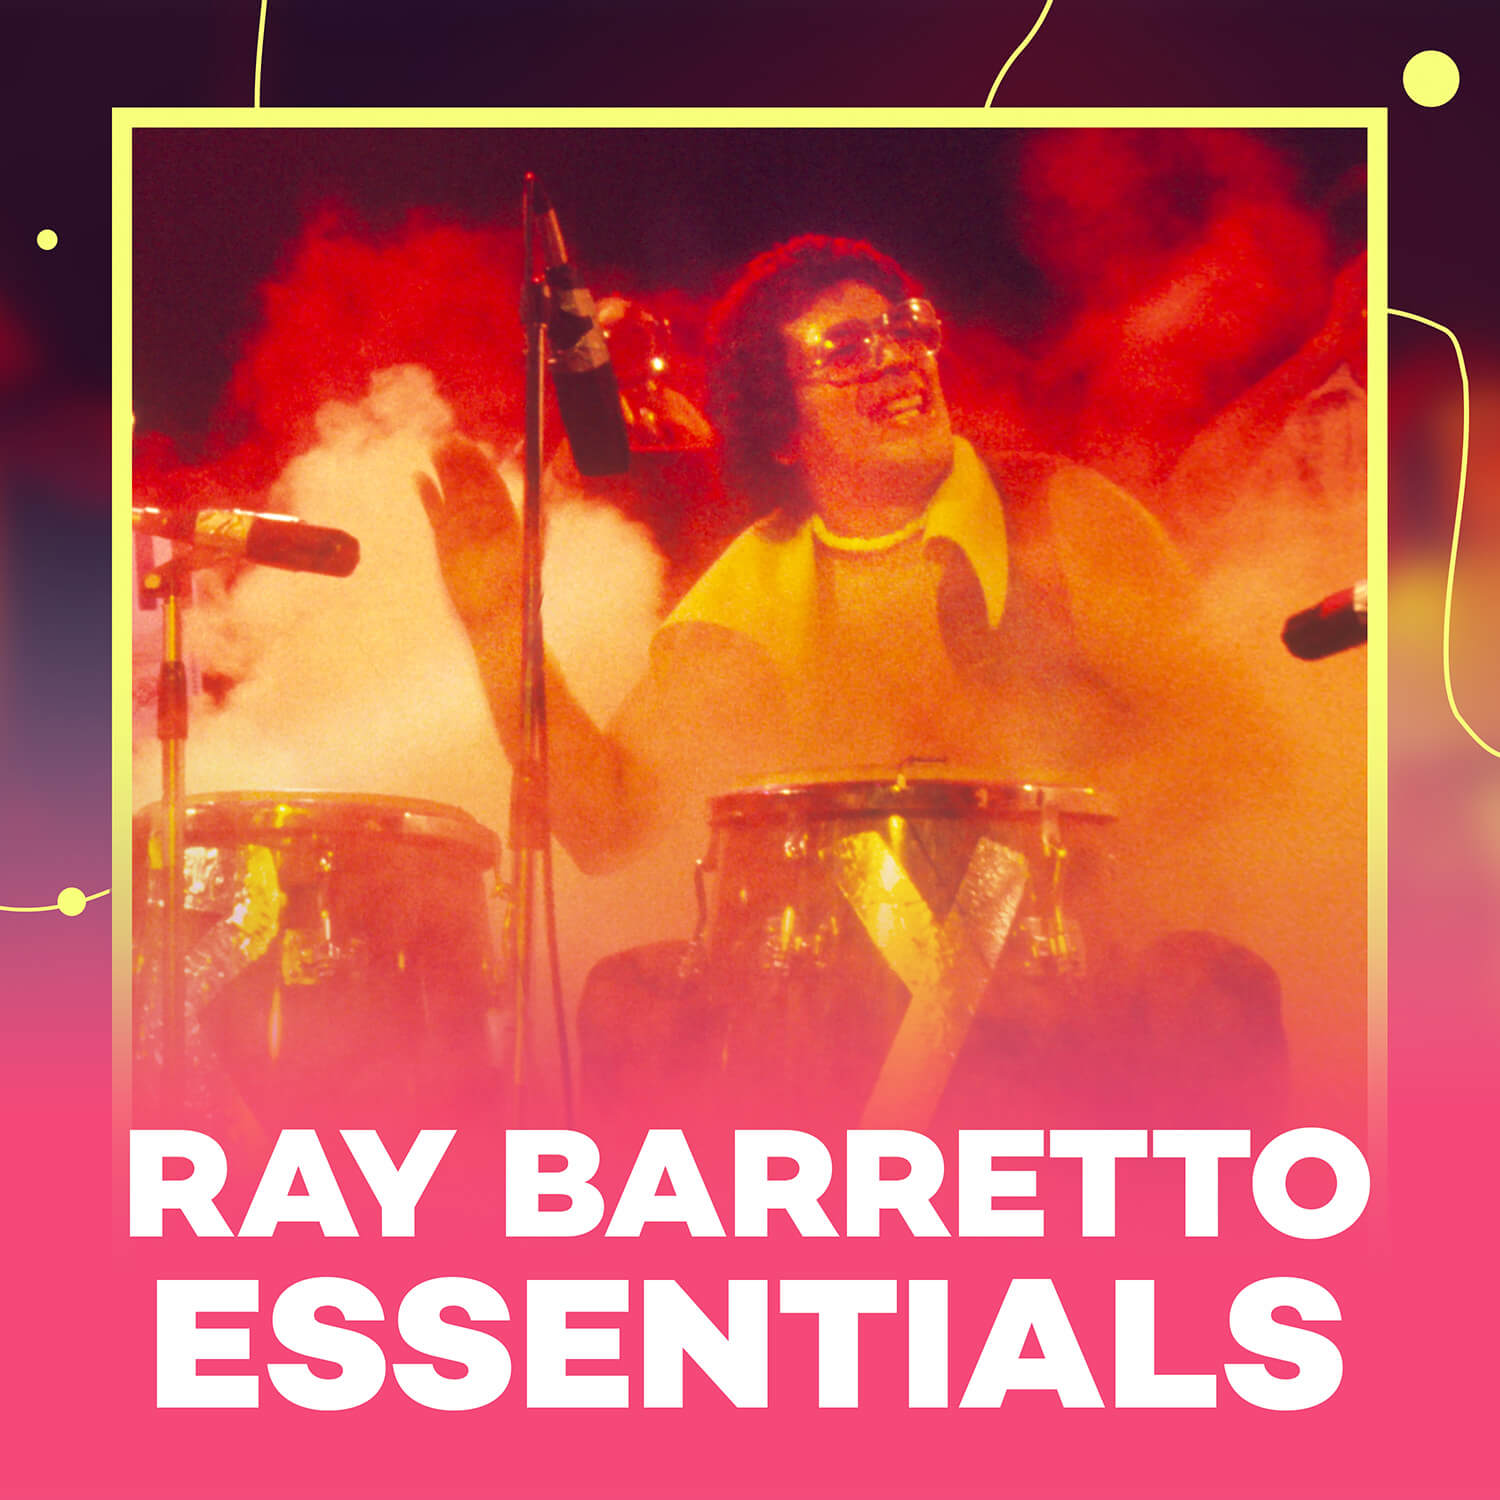 Featured image for “Ray Barretto”